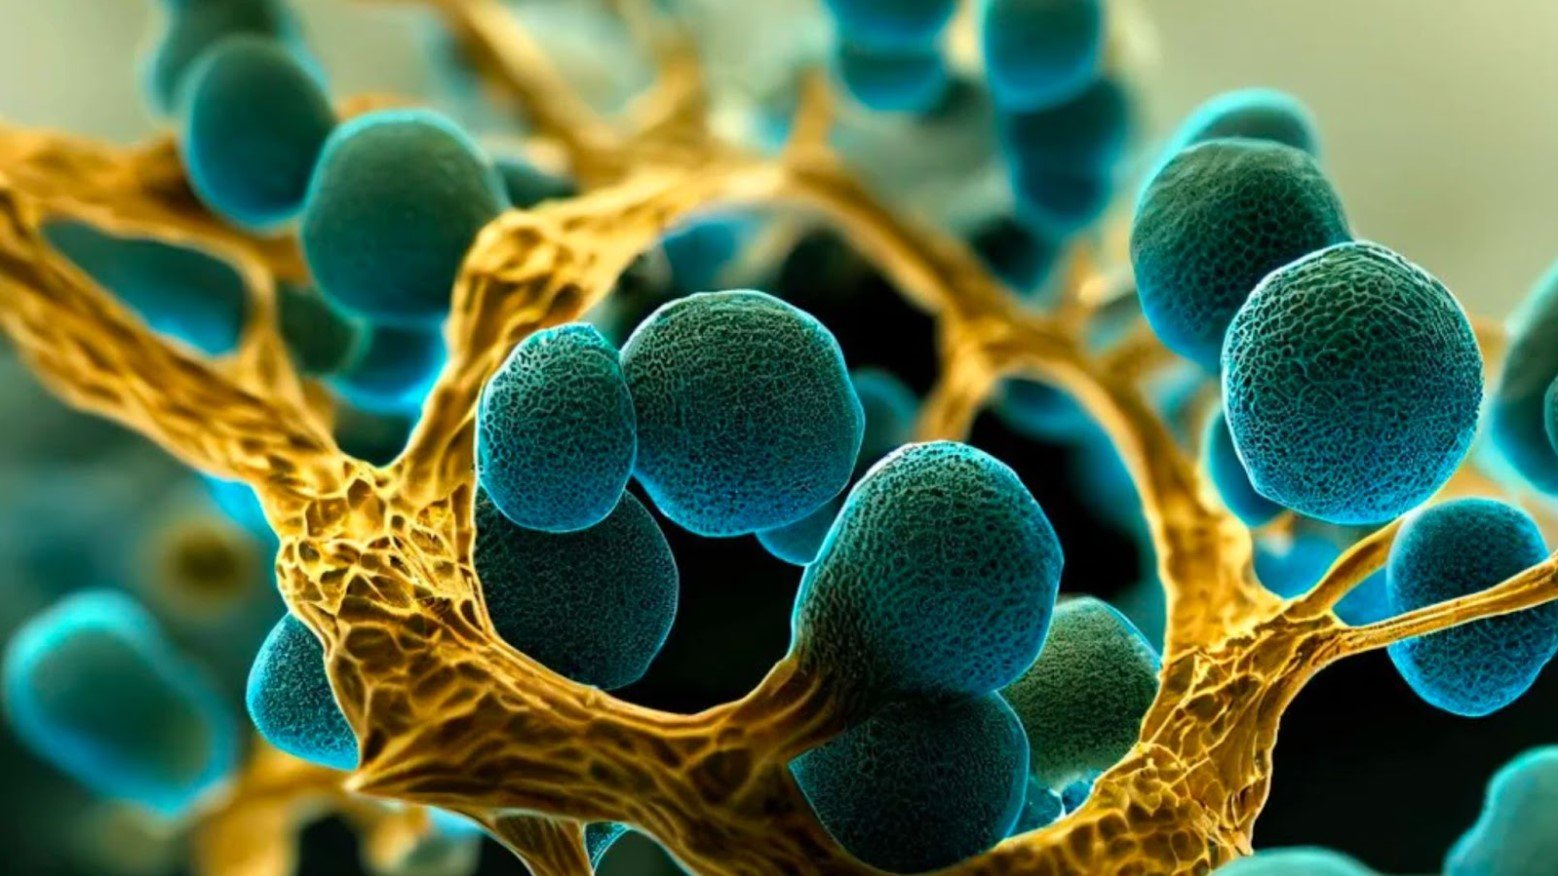 A microscopic image of Candida auris is shown.